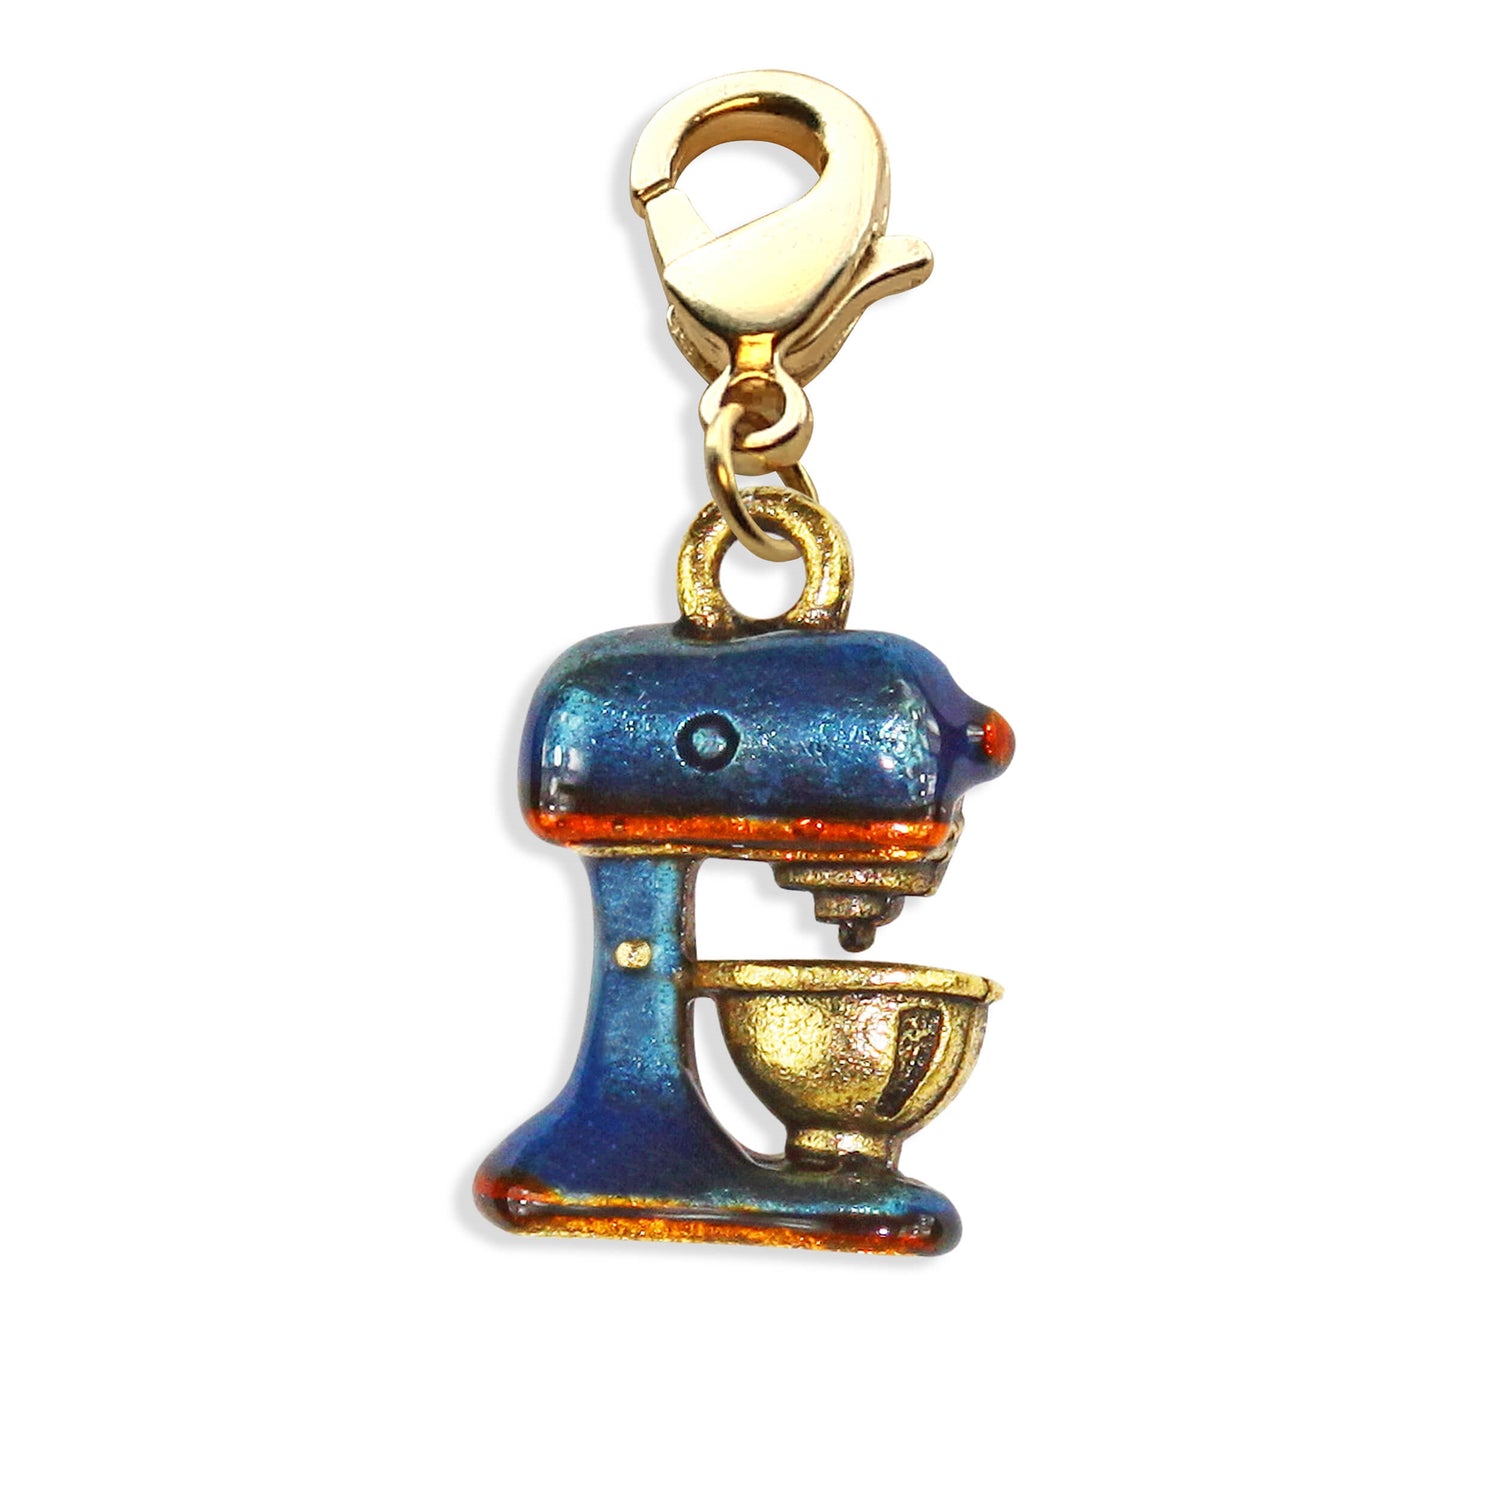 Whimsical Gifts | Mixer Charm Dangle in Gold Finish | Hobbies & Special Interests | Chef | Cooking | Baking Charm Dangle